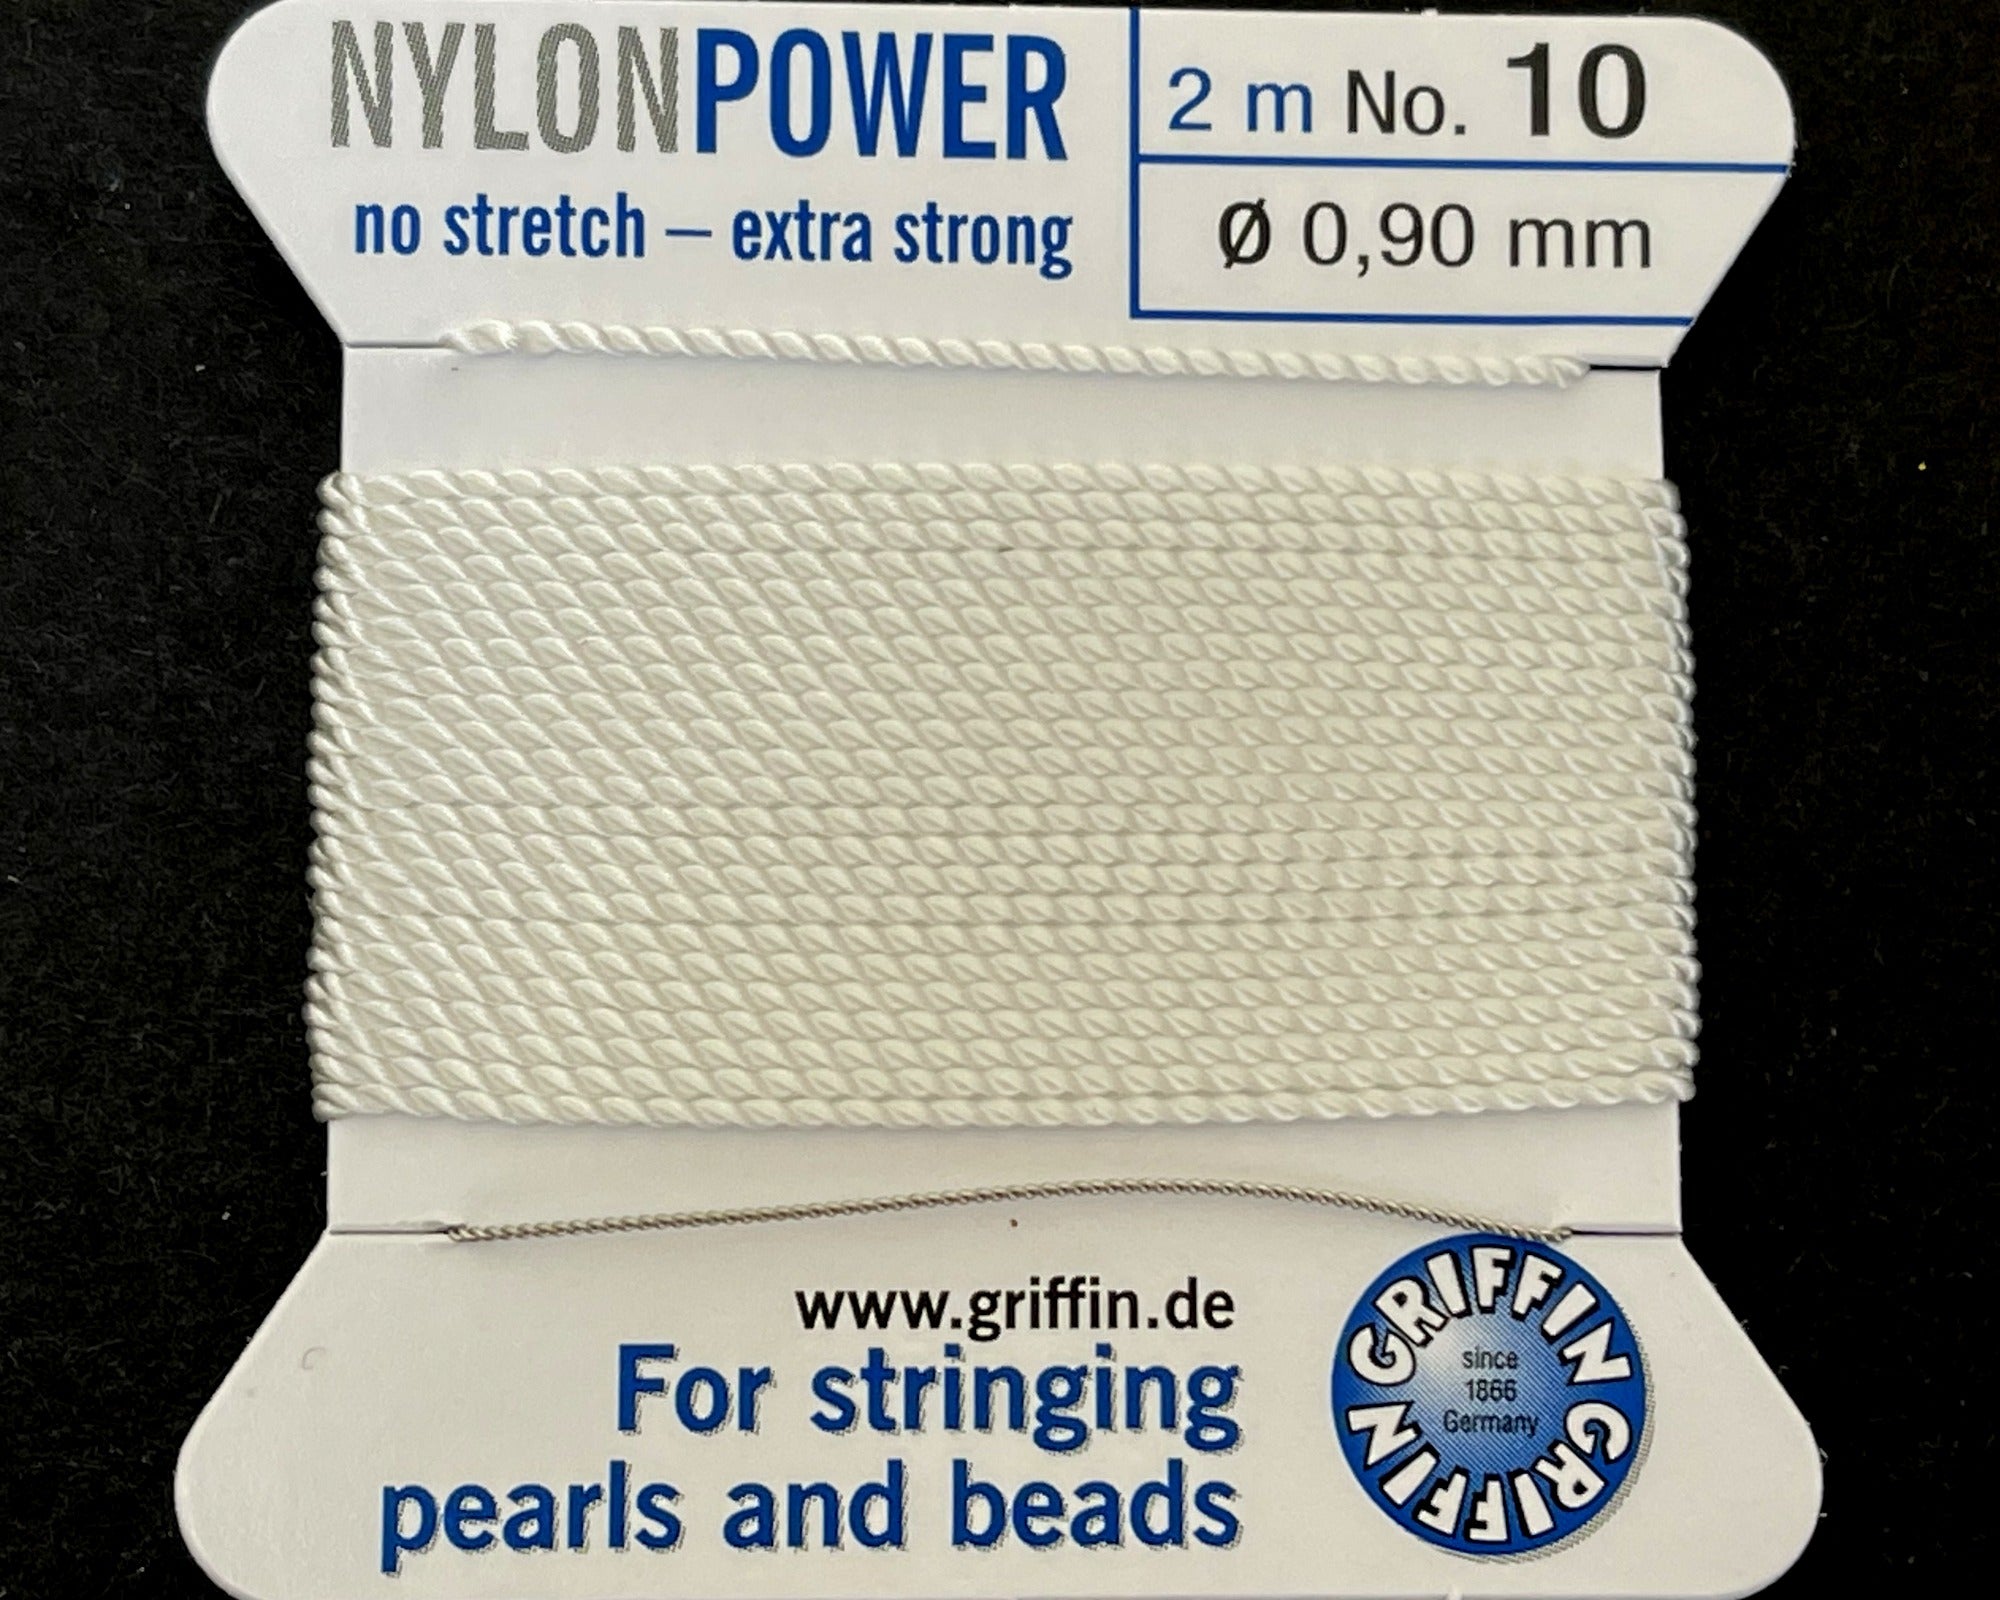 Griffin Nylon Power beading cord with needle, size #10 - 0.9mm, 2